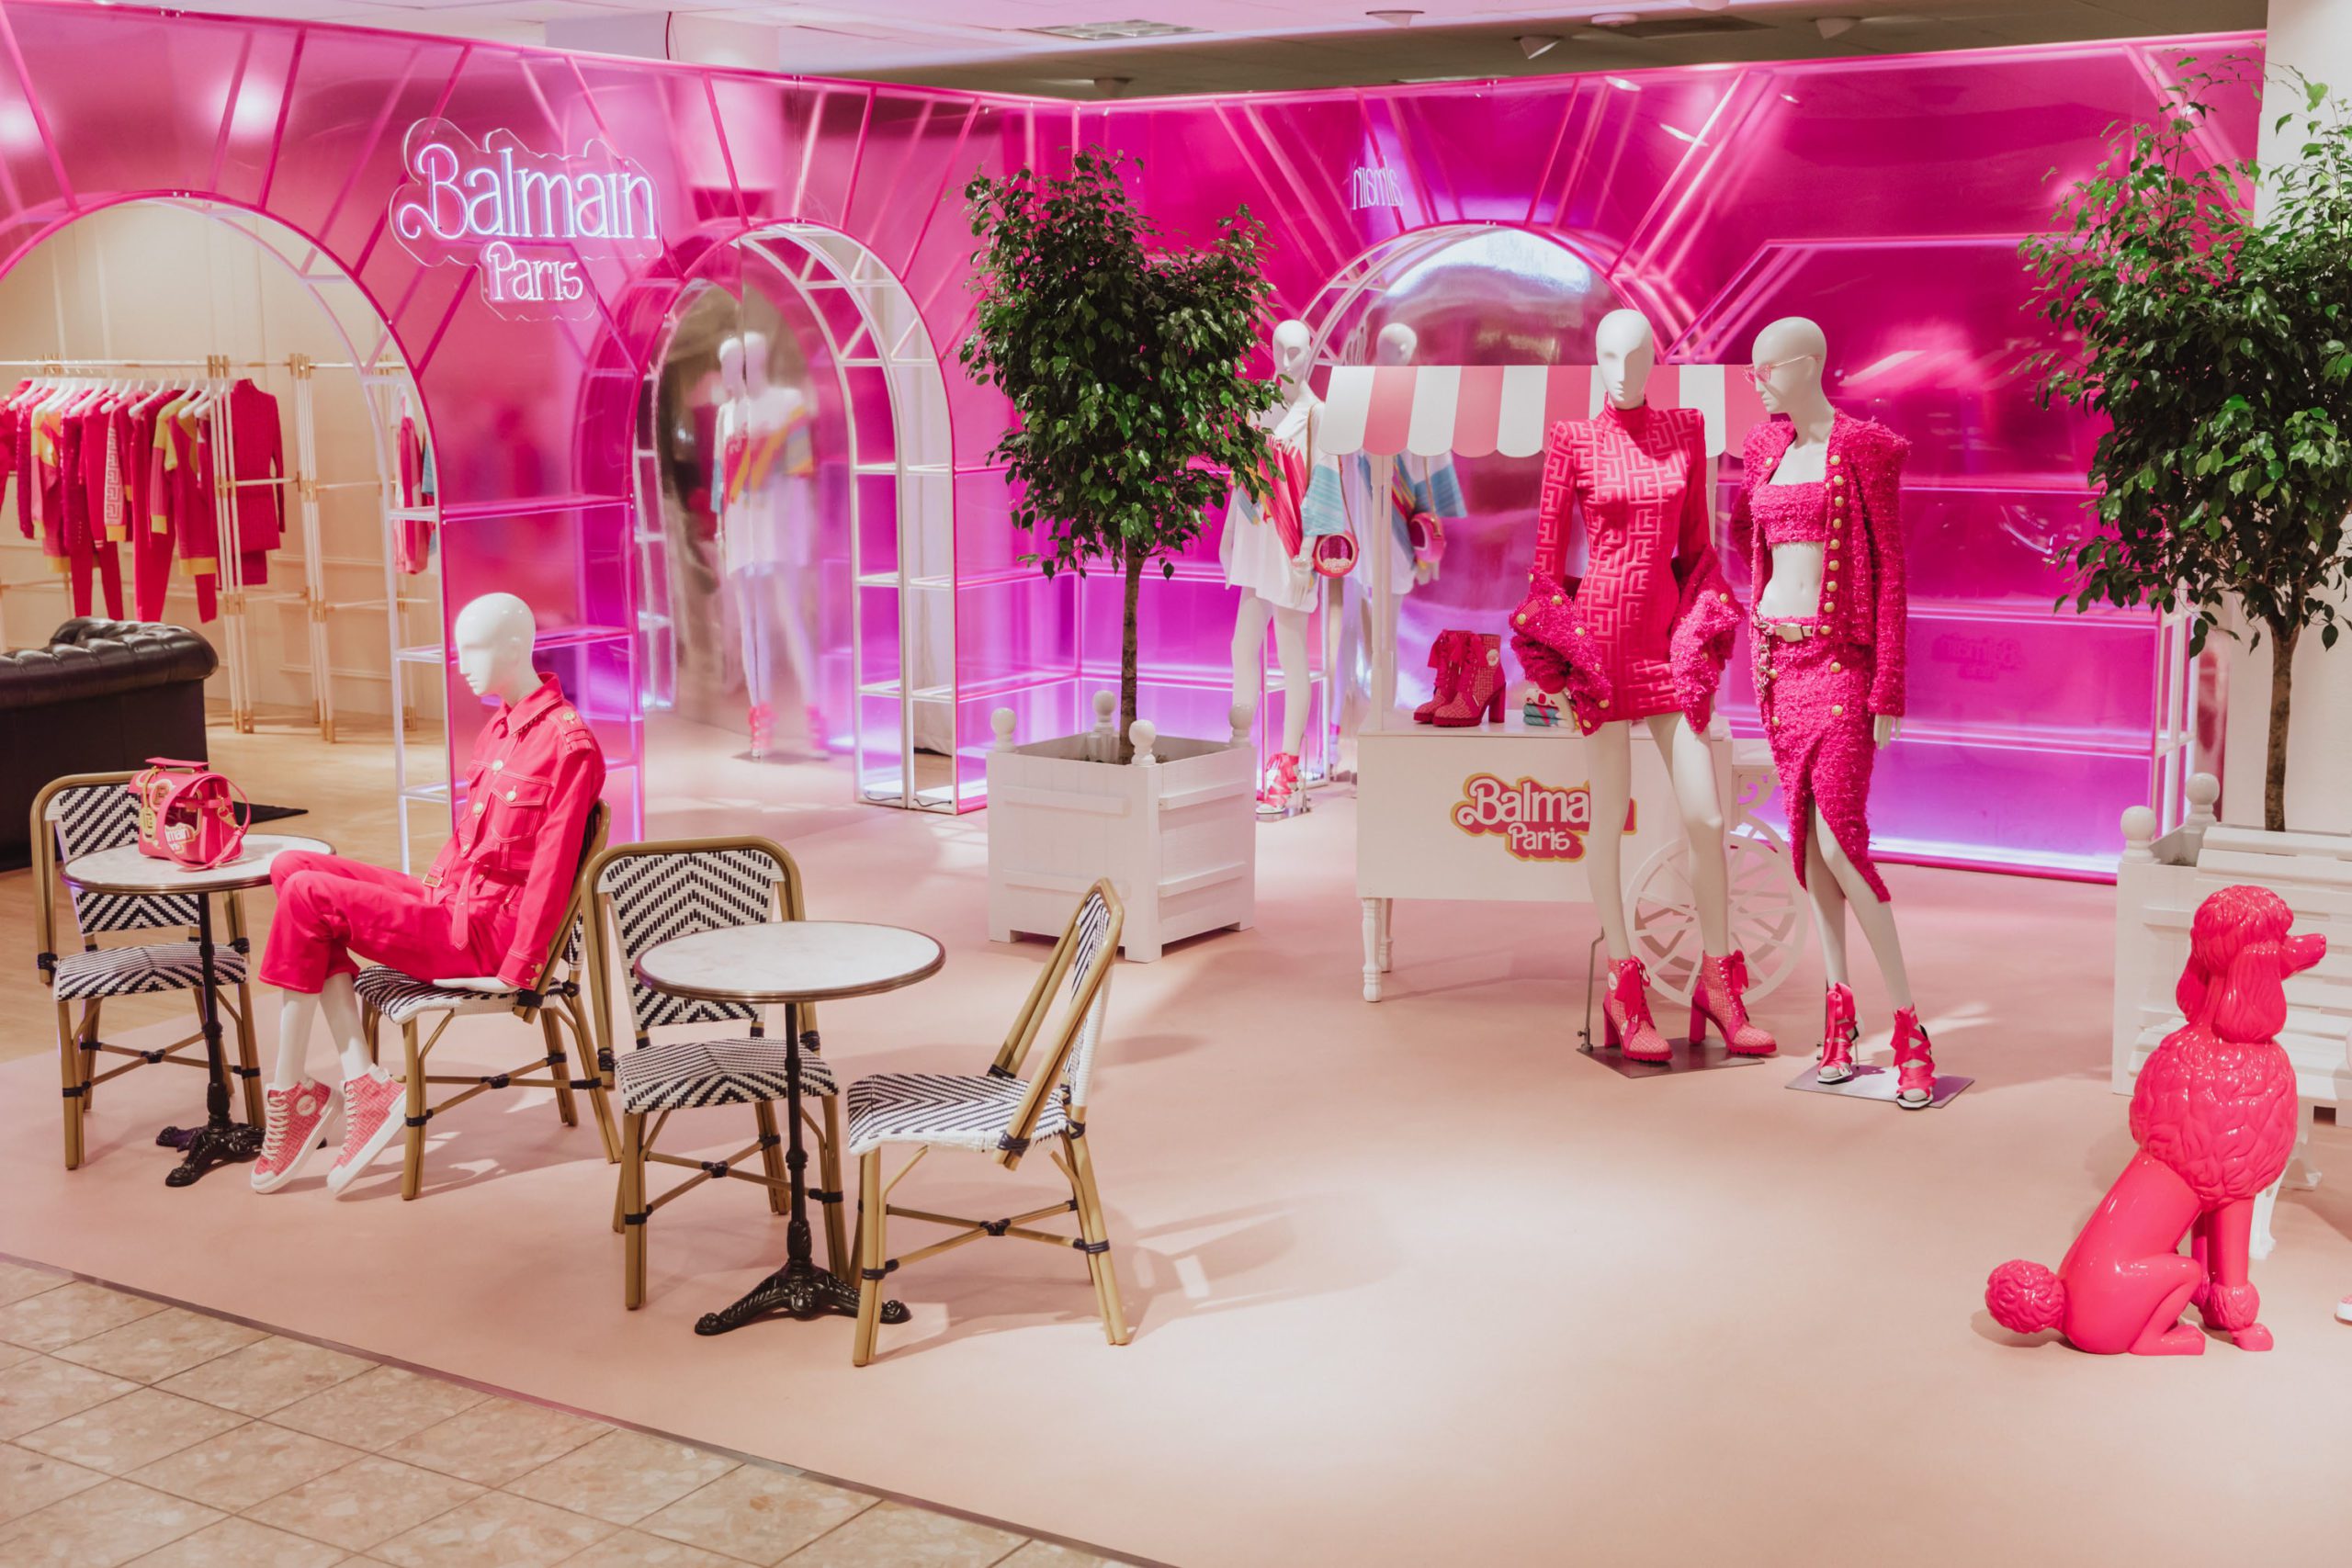 Balmain x Barbie Pop-Up Comes to Dallas For 10 More Days